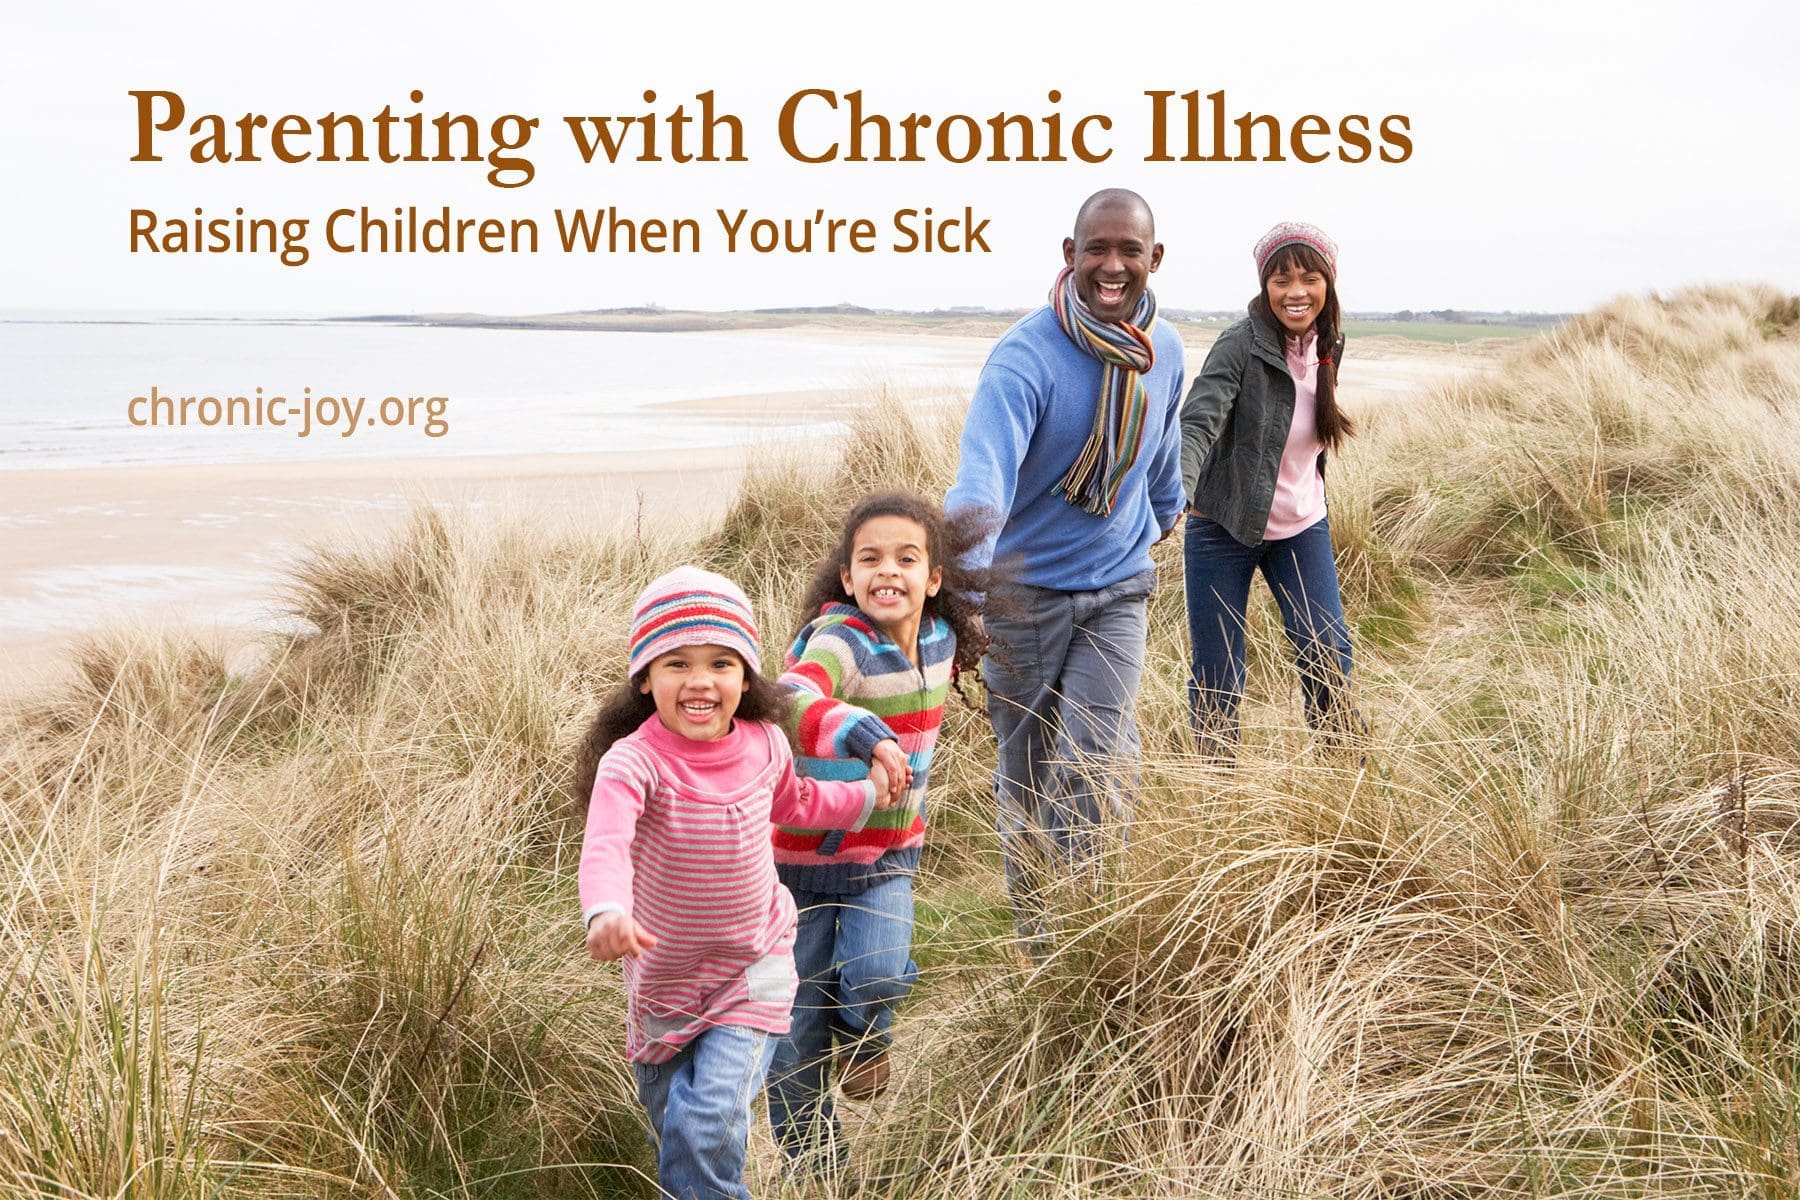 Parenting with Chronic Illness: Raising Children When You're Sick